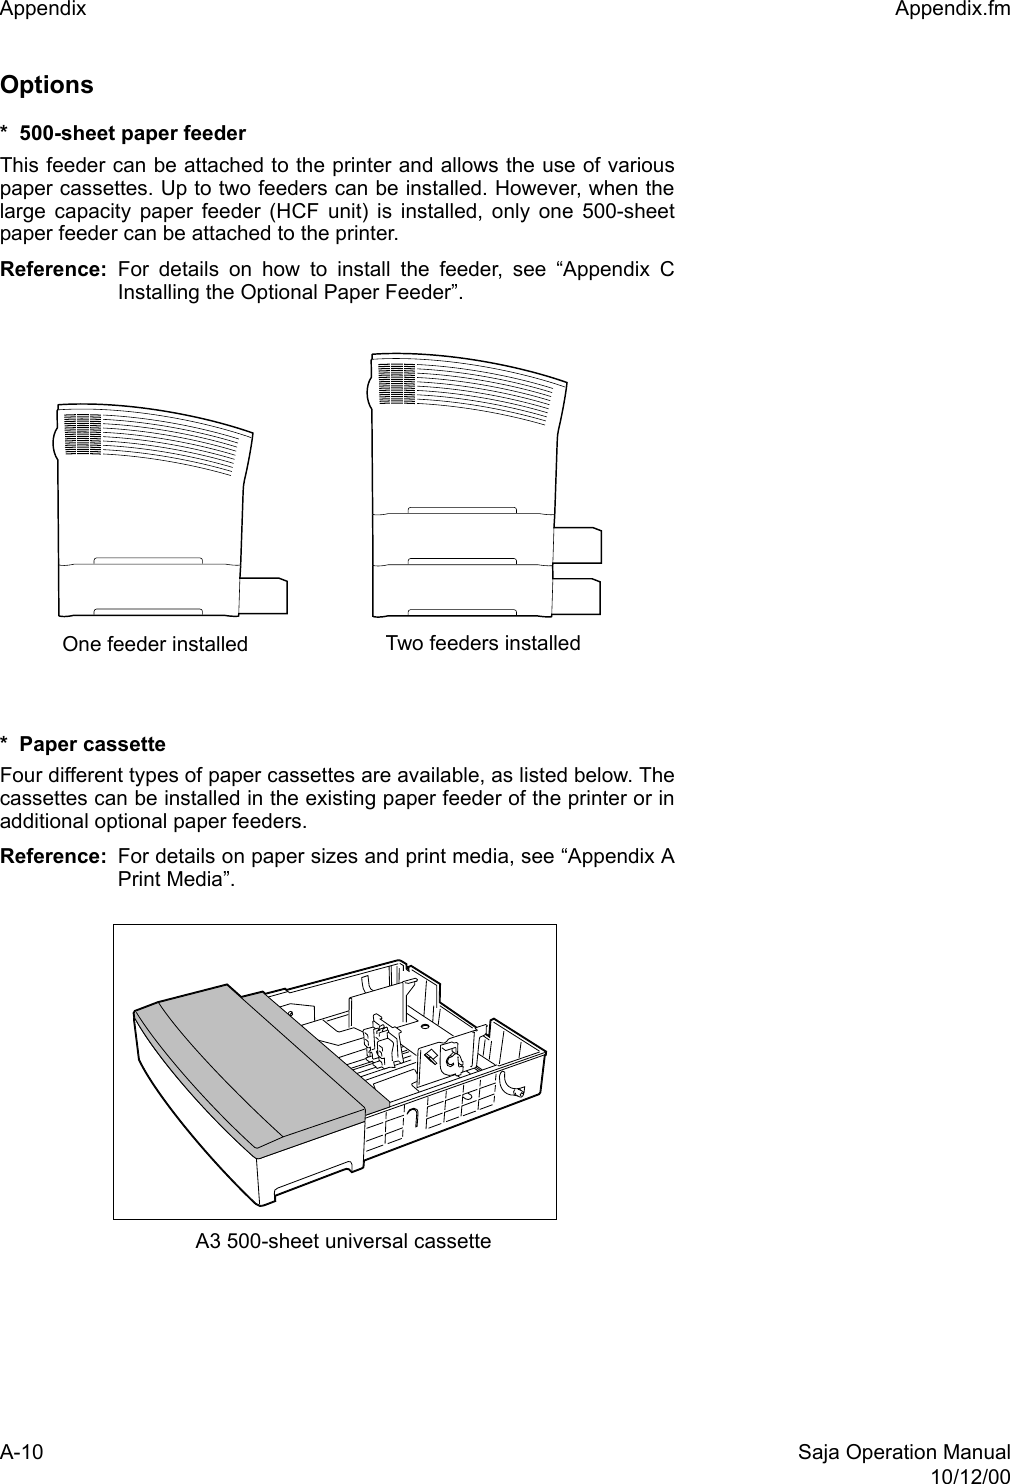 A-10 Saja Operation Manual10/12/00Appendix  Appendix.fmOptions *  500-sheet paper feeder This feeder can be attached to the printer and allows the use of variouspaper cassettes. Up to two feeders can be installed. However, when thelarge capacity paper feeder (HCF unit) is installed, only one 500-sheetpaper feeder can be attached to the printer.Reference:  For details on how to install the feeder, see “Appendix CInstalling the Optional Paper Feeder”. *  Paper cassette Four different types of paper cassettes are available, as listed below. Thecassettes can be installed in the existing paper feeder of the printer or inadditional optional paper feeders. Reference: For details on paper sizes and print media, see “Appendix APrint Media”. One feeder installed Two feeders installedA3 500-sheet universal cassette